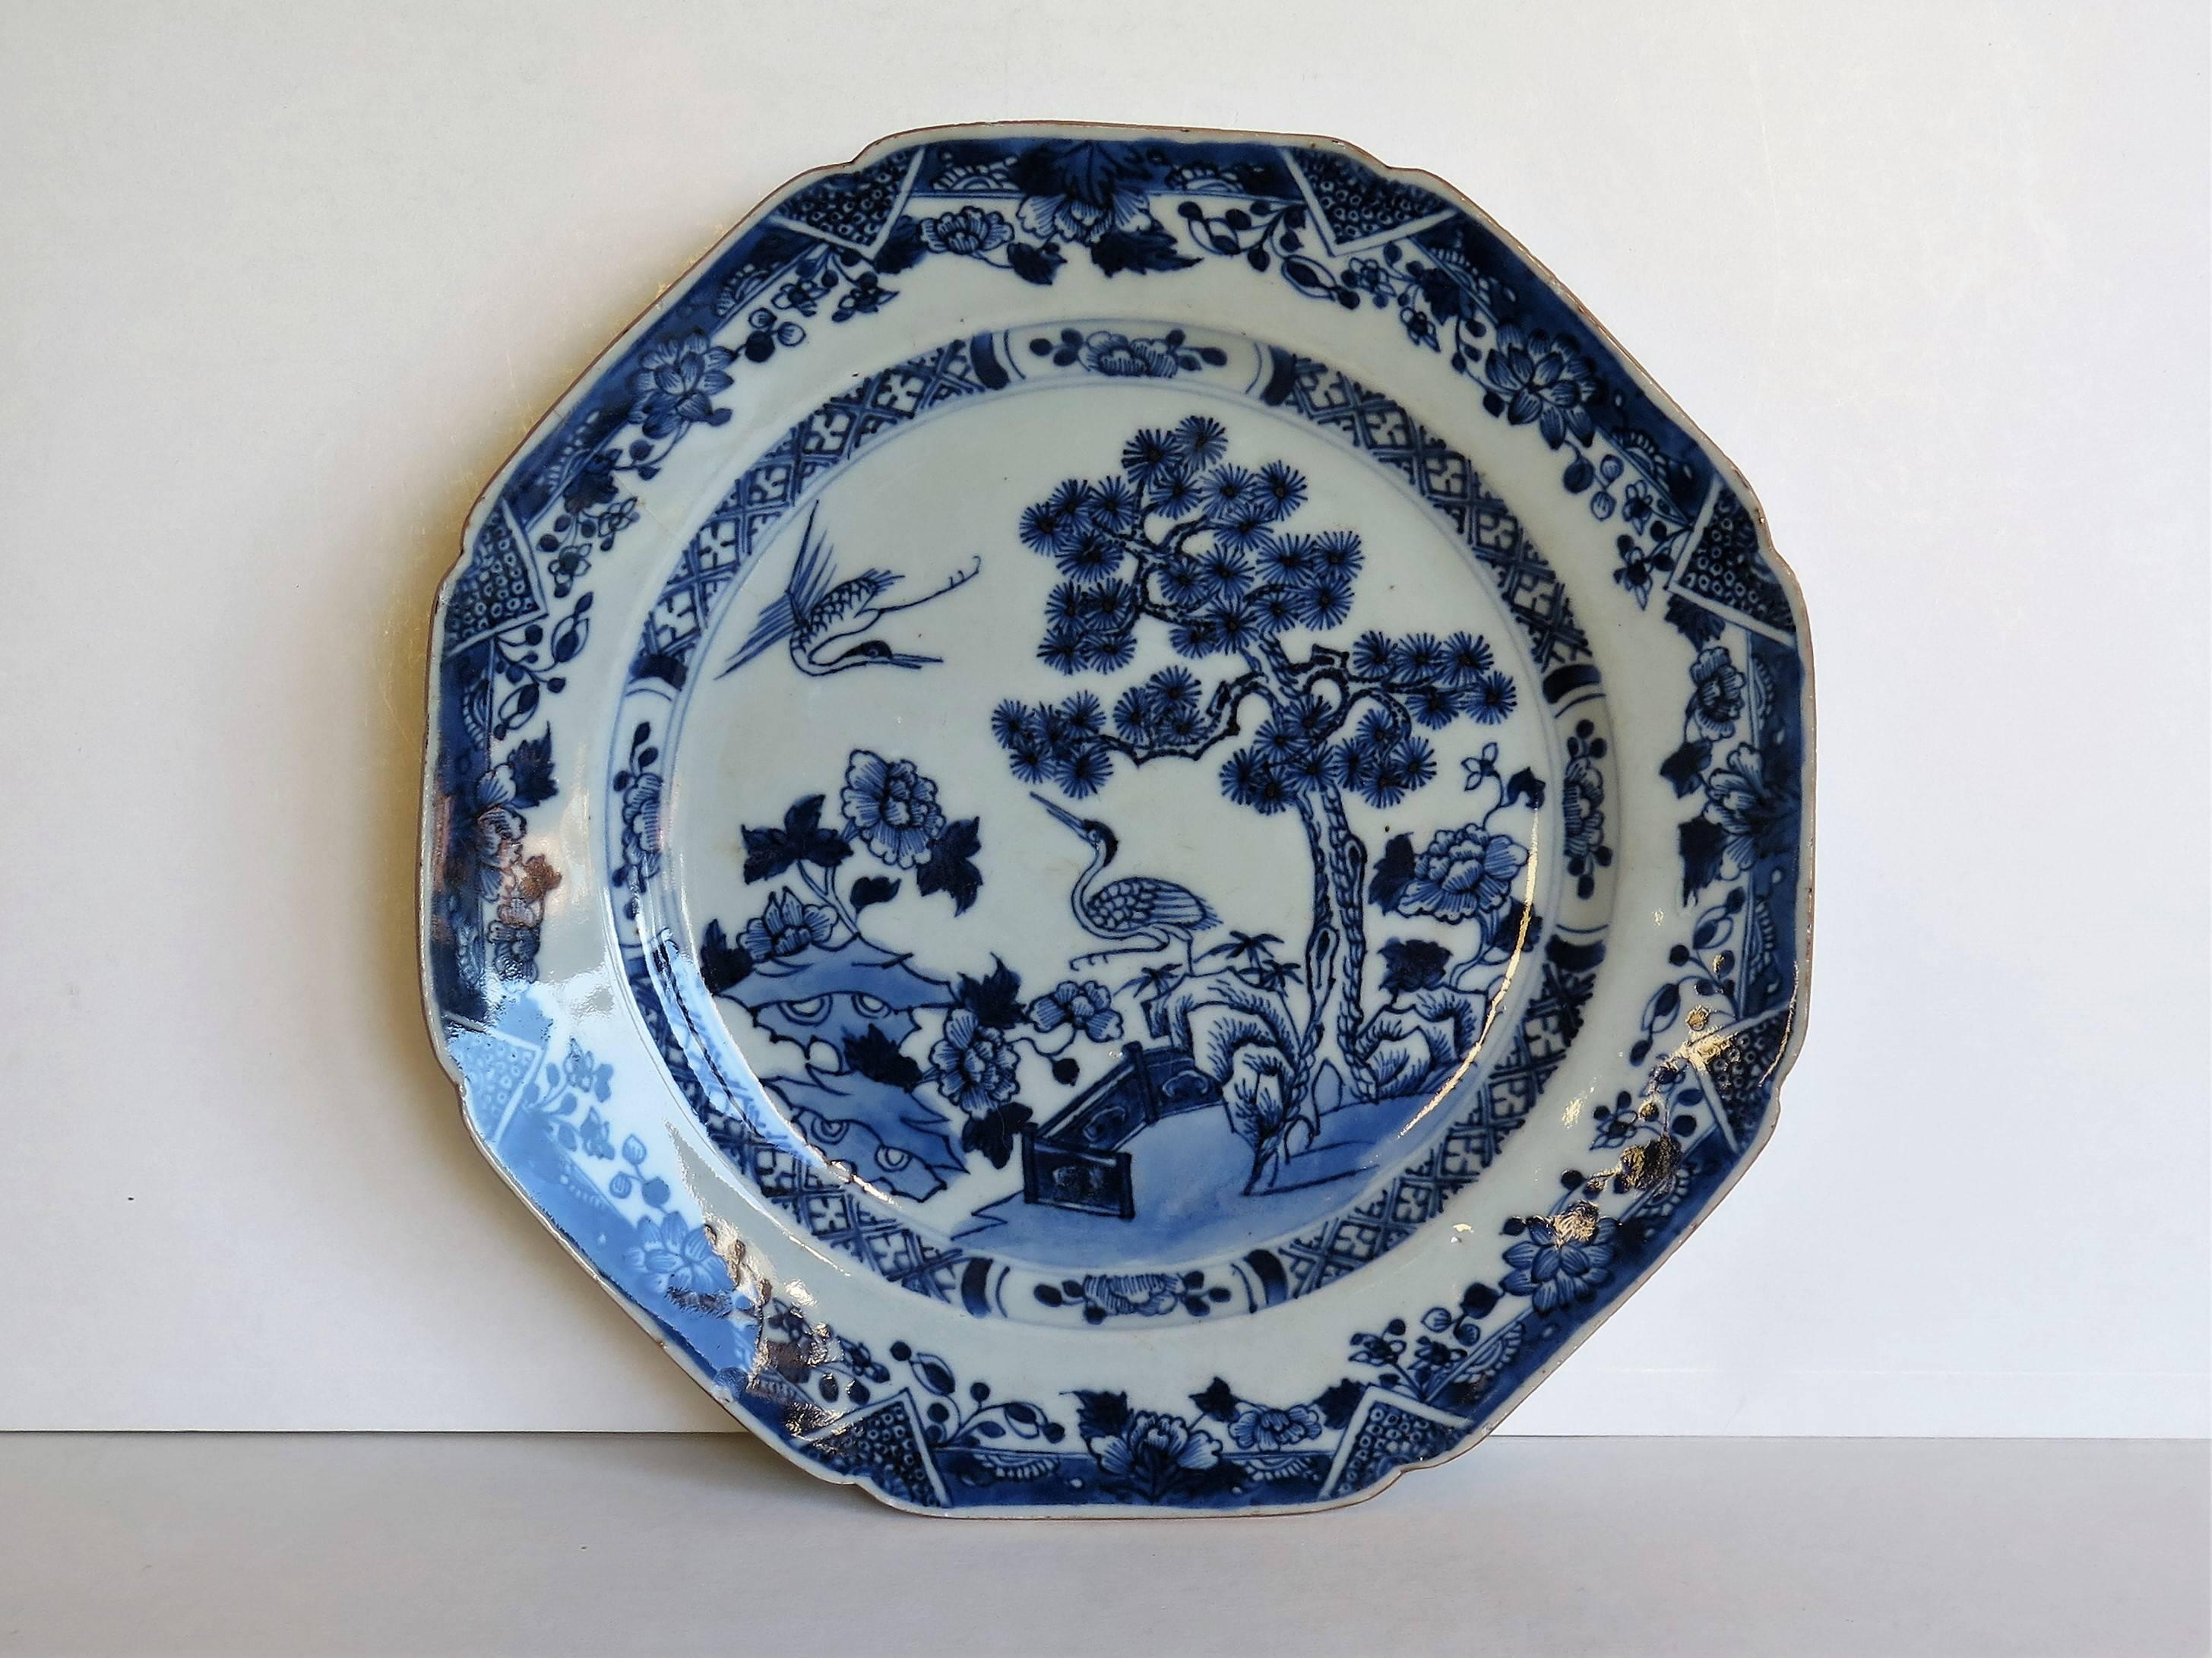 Chinoiserie 18th Century Chinese Porcelain Plate Blue and White Two Storks Qing Qianlong